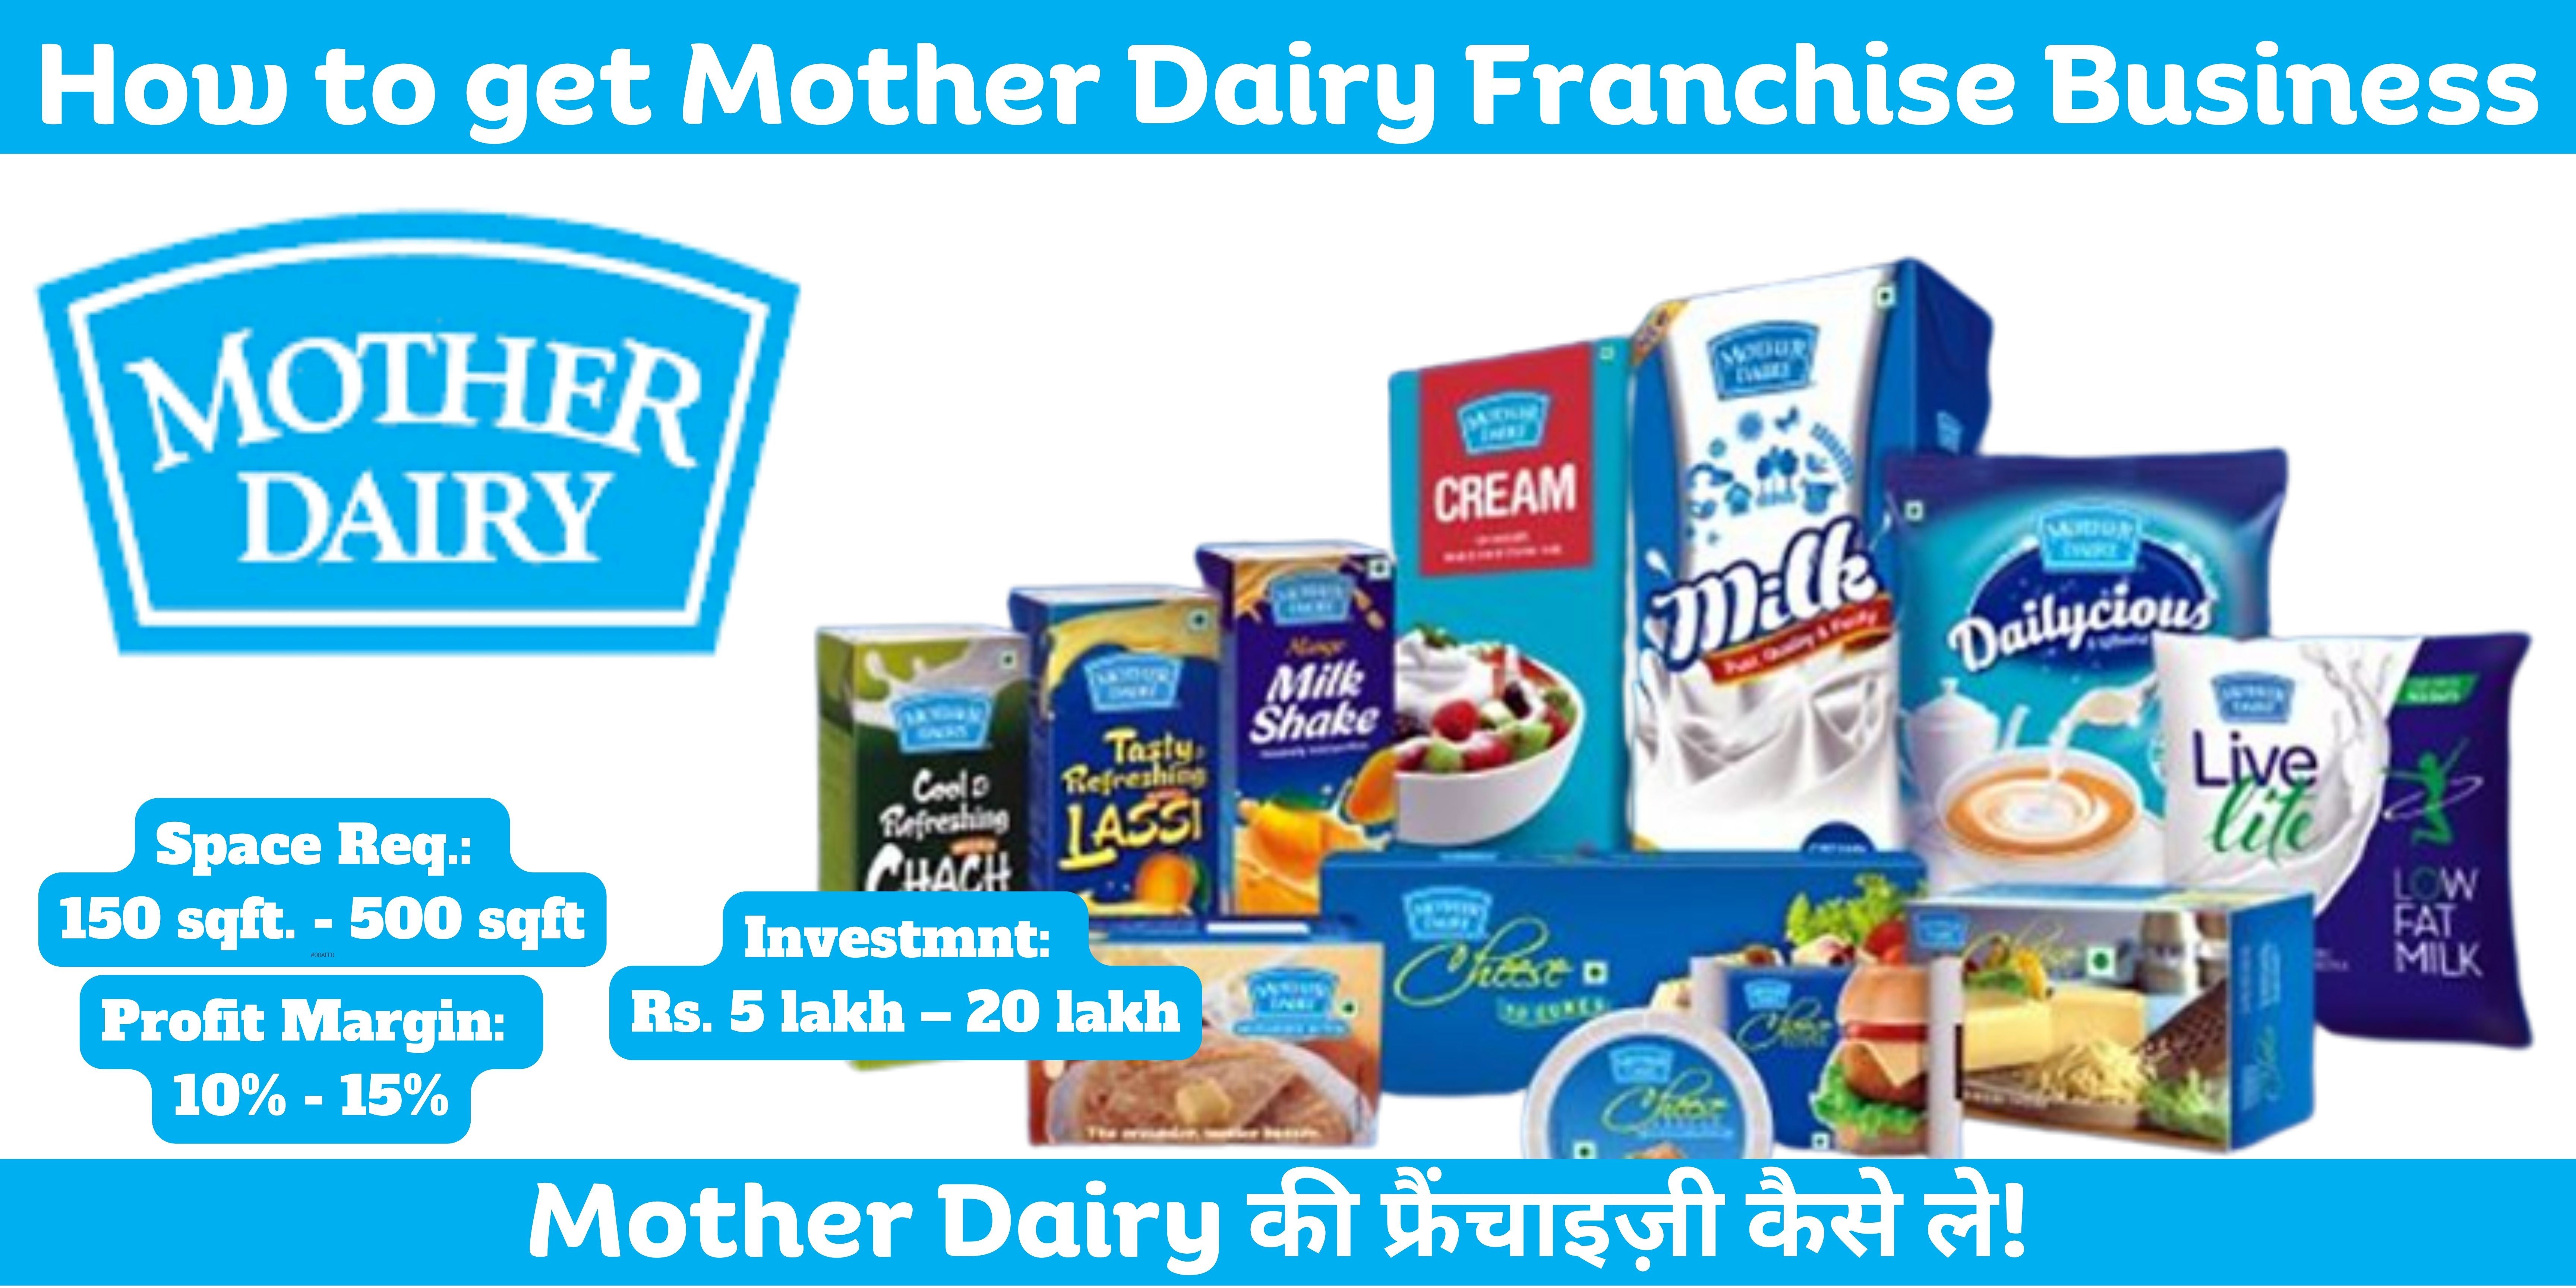 How to get Mother Dairy Franchise Business